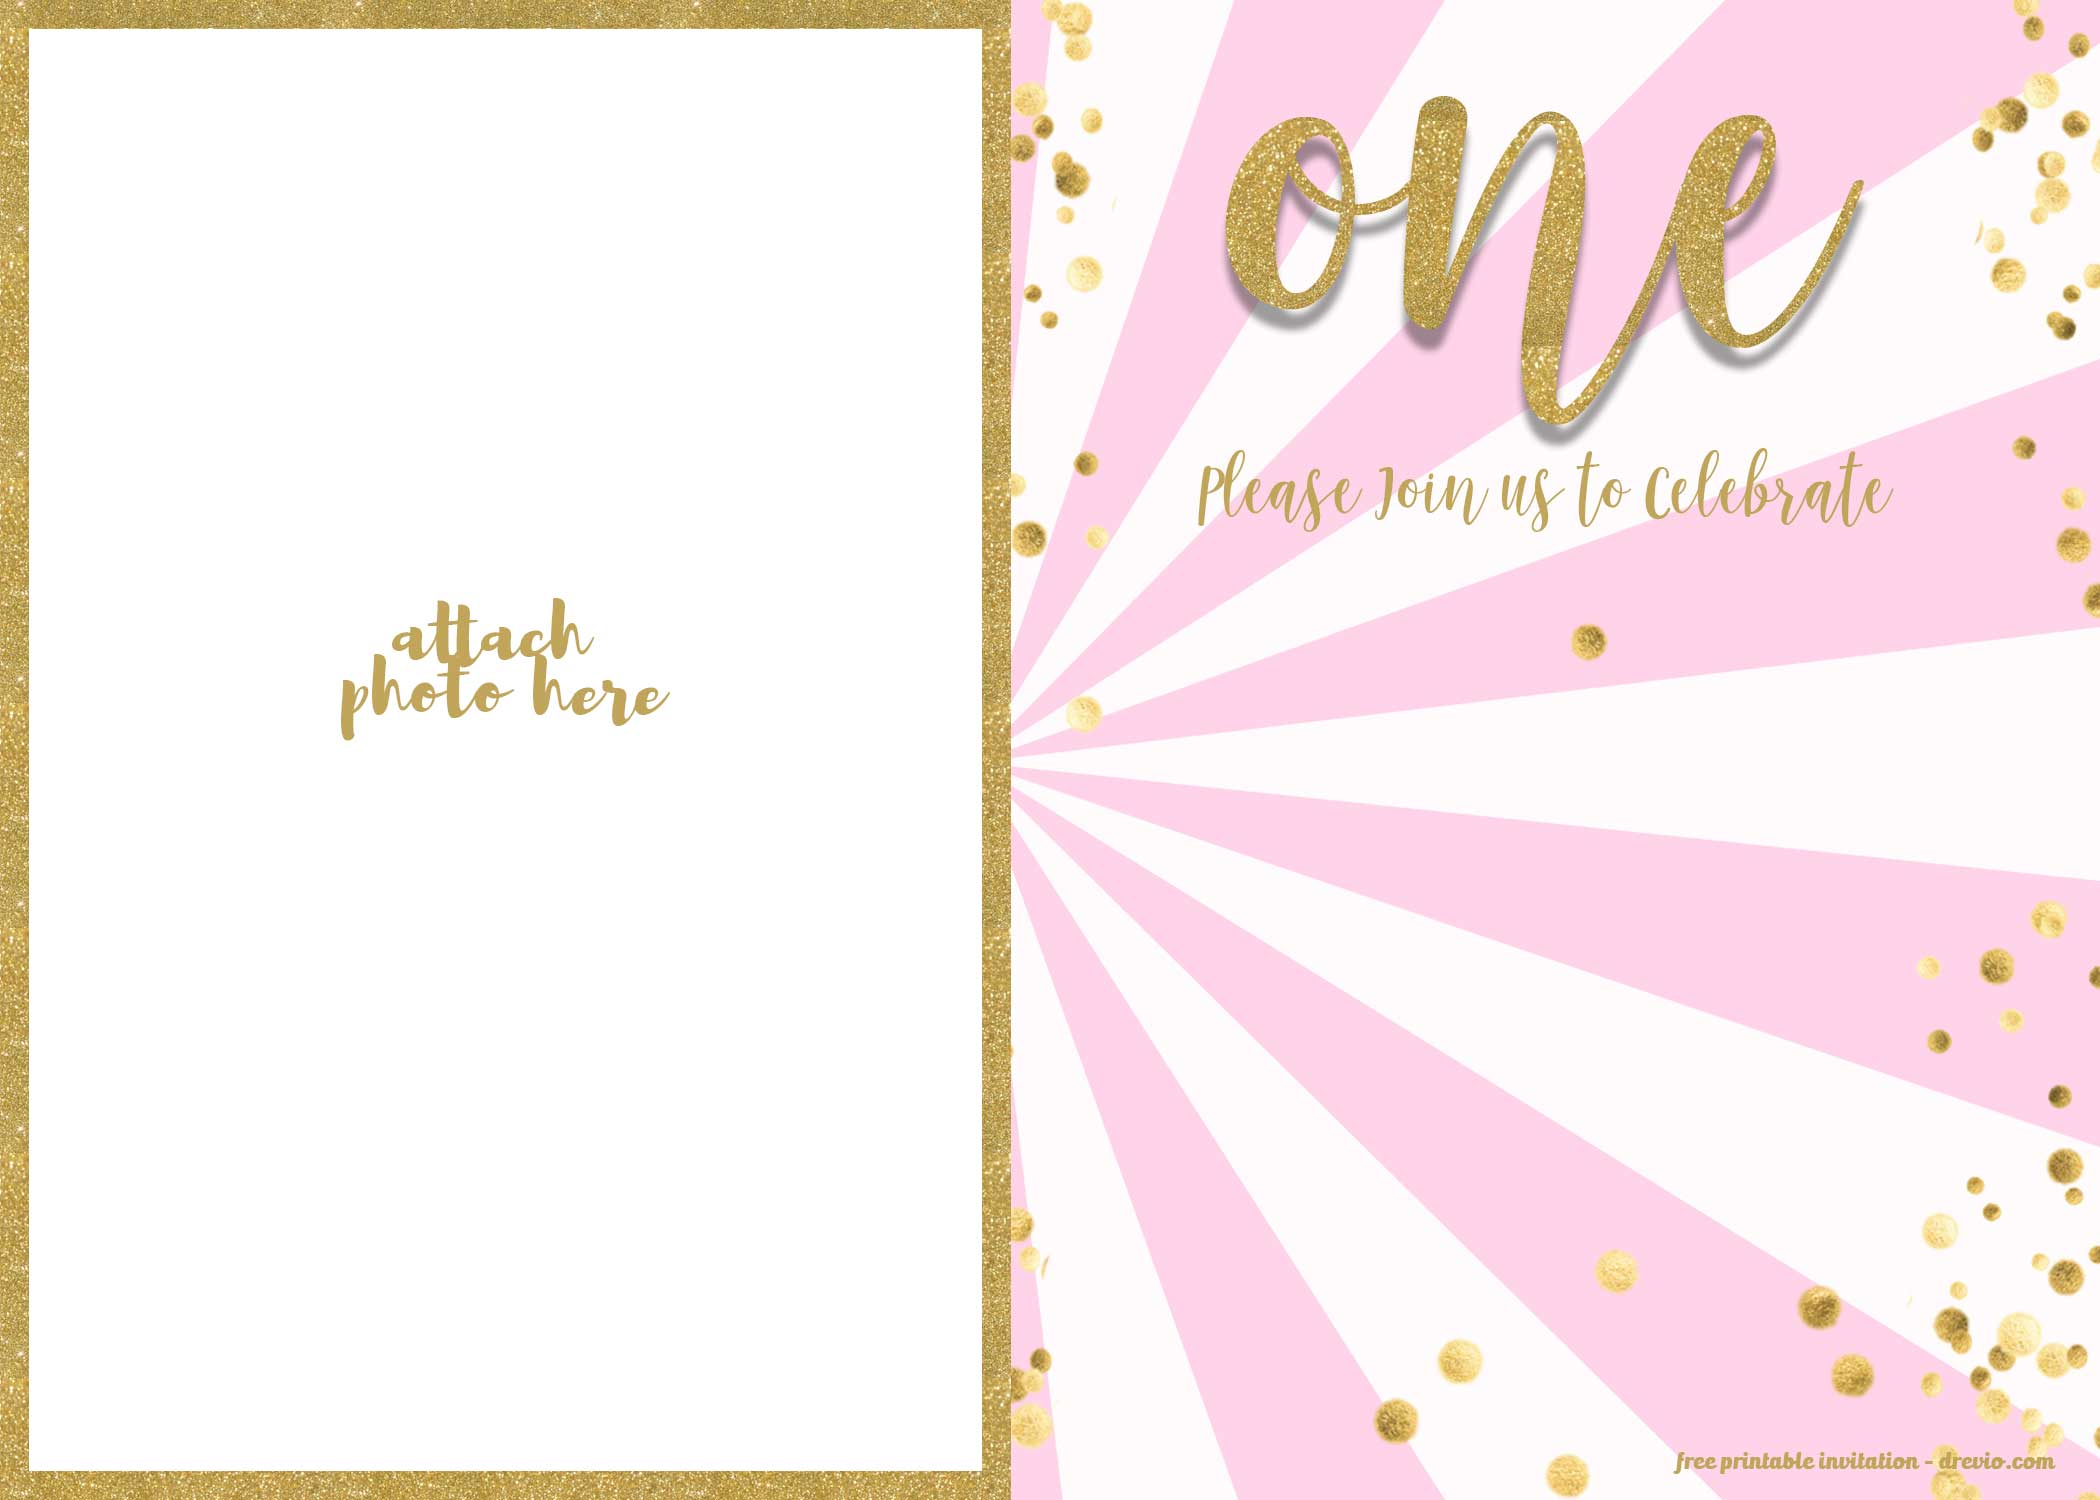 FREE 1st Birthday Invitation Pink And Gold Glitter Template FREE